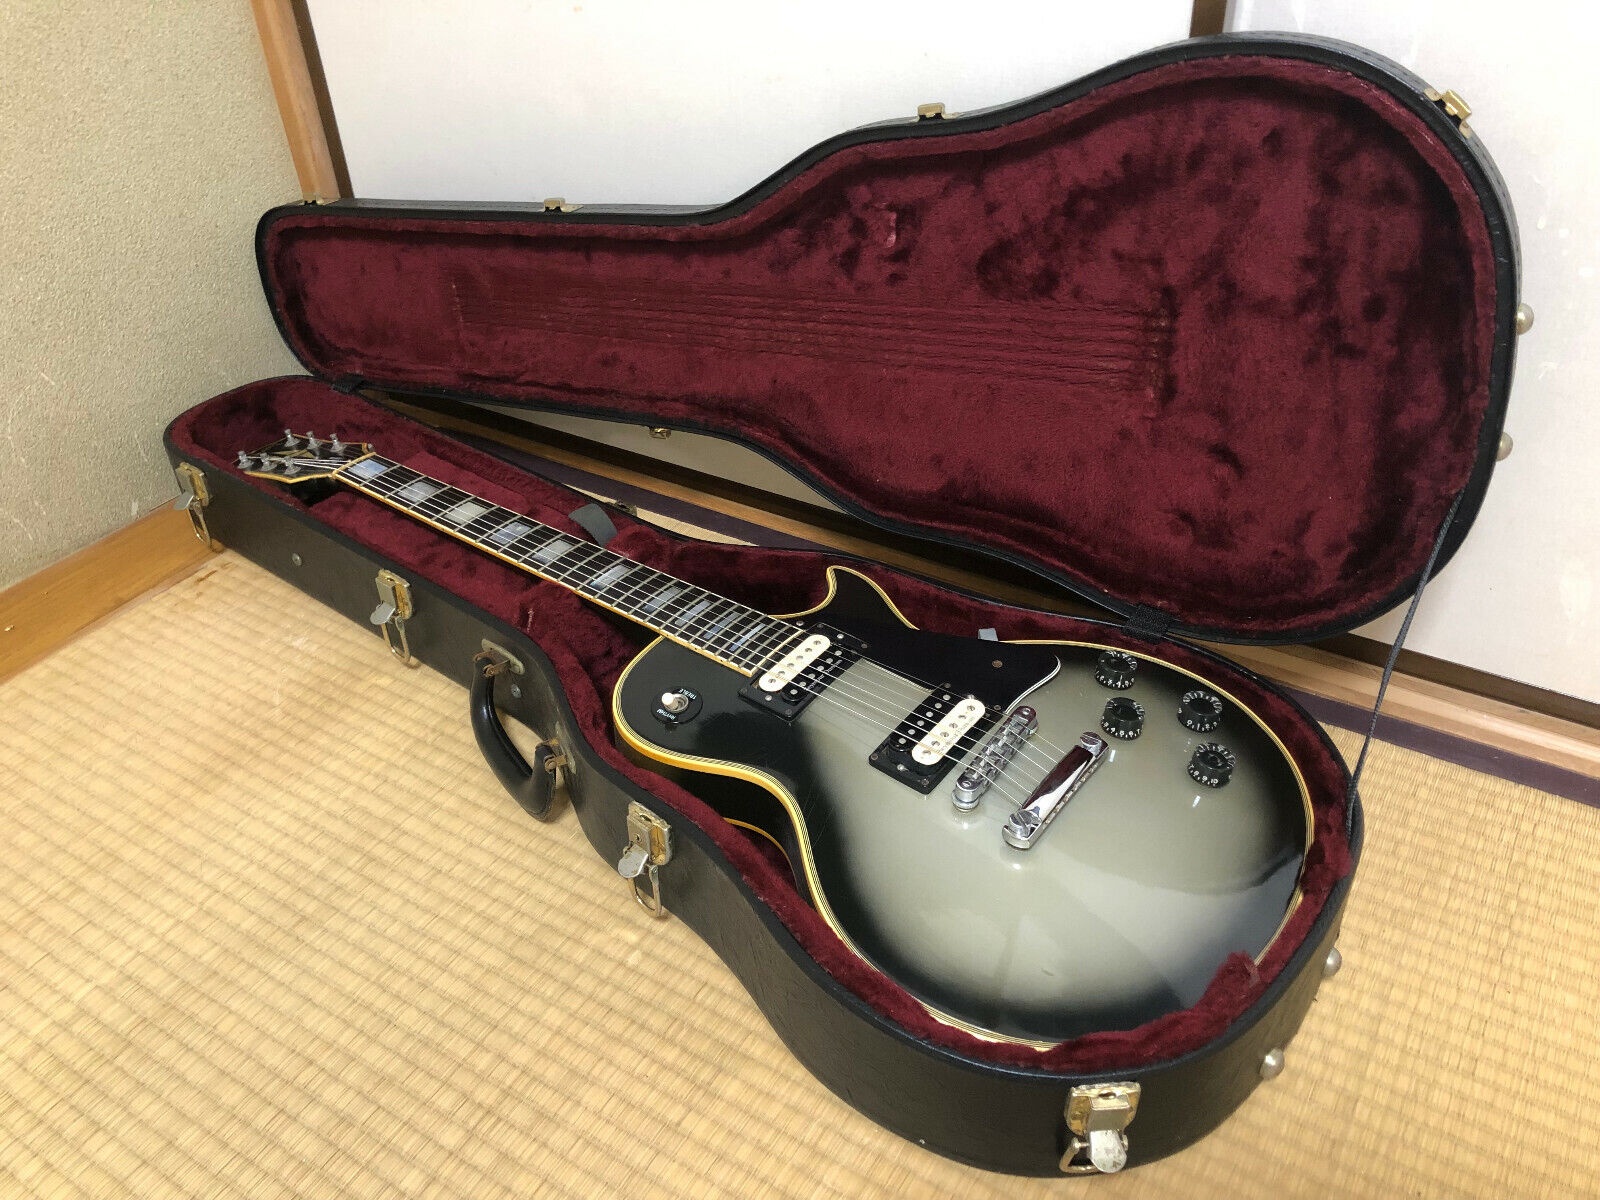 Available now on eBay UK this 1981 Gibson Les Paul Silverburst